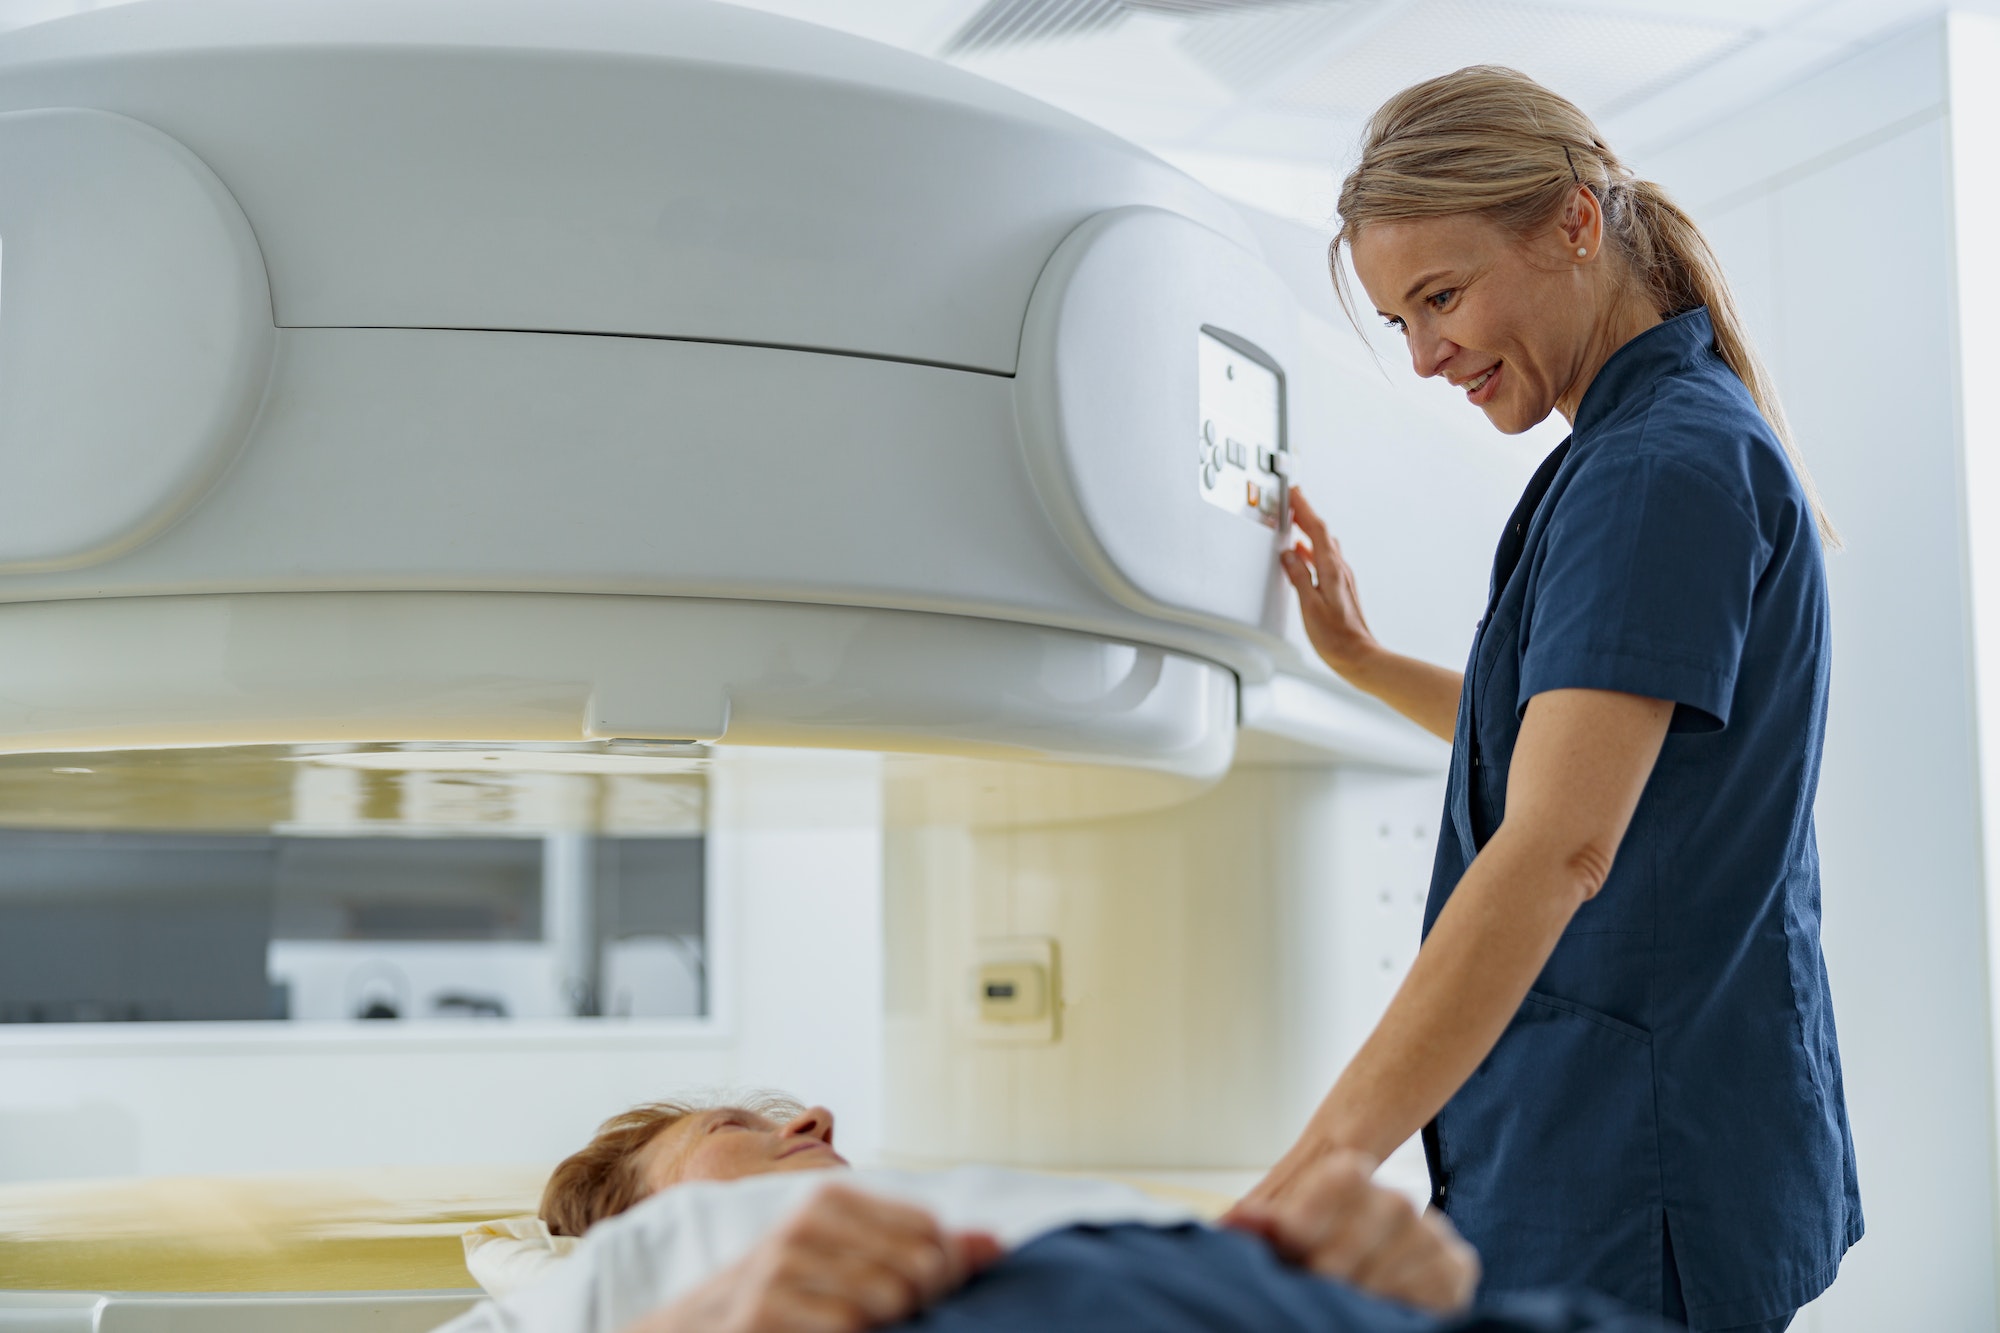 Radiologist controls MRI or CT or PET Scan with female patient undergoing procedure